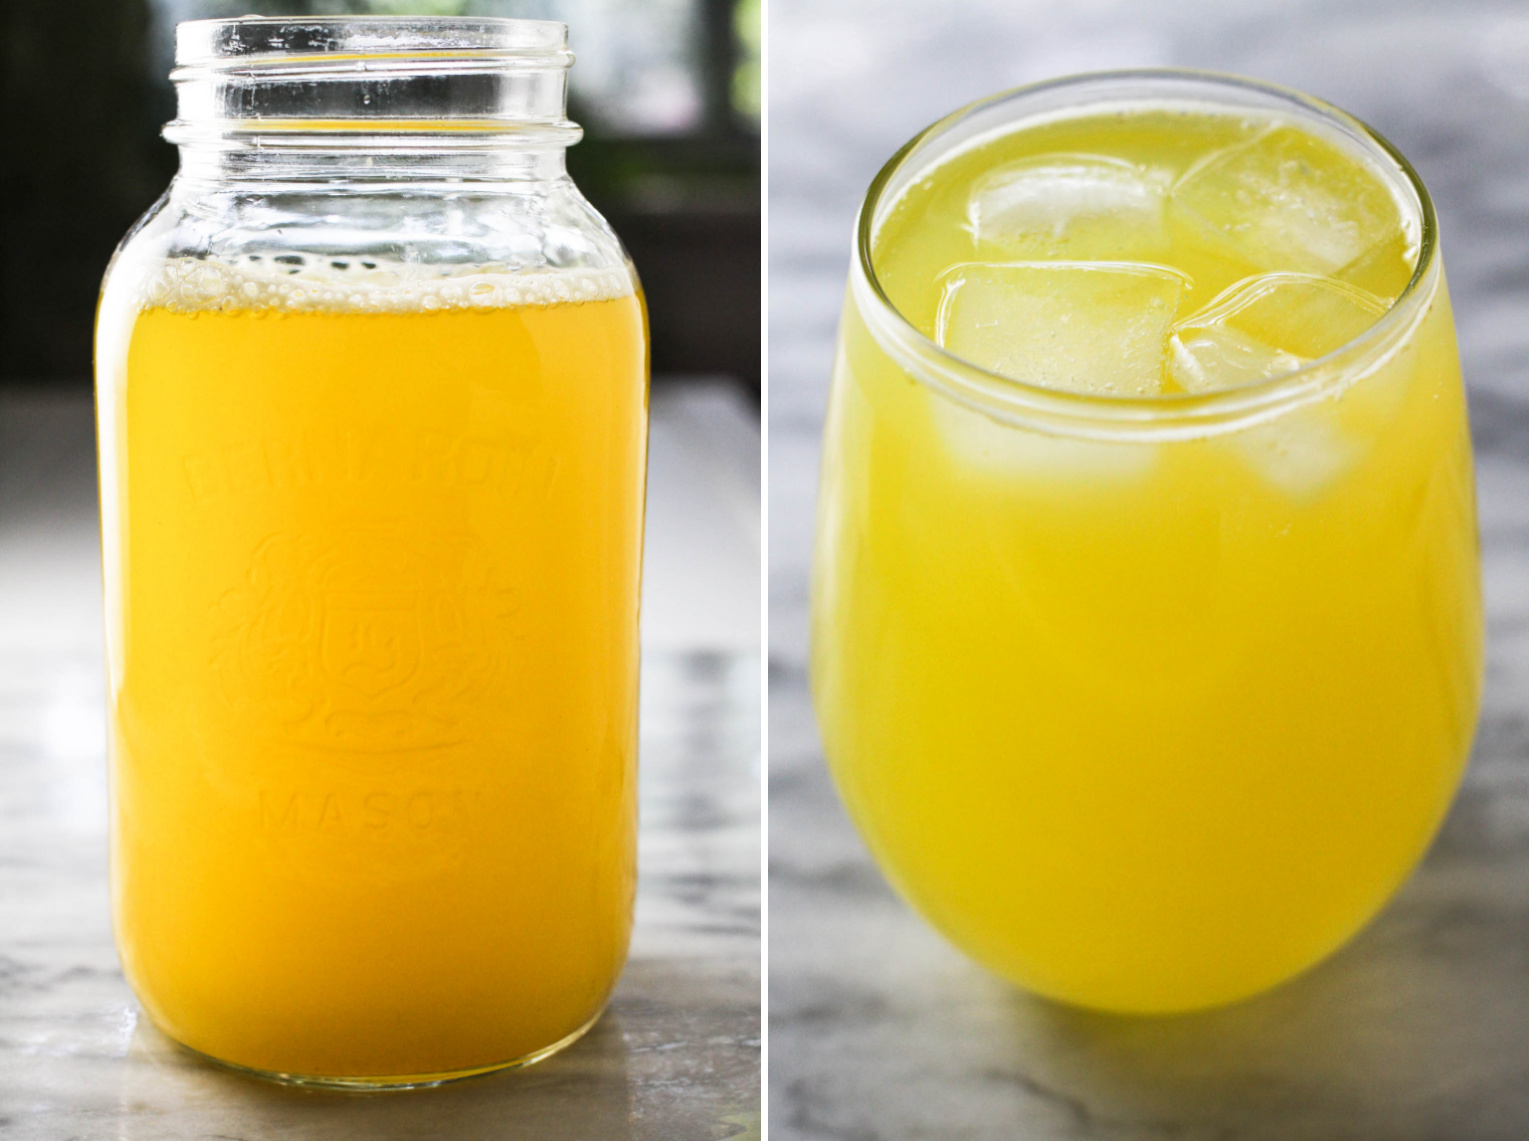 Two side-by-side images. On the left, a Mason jar with pineapple water. On the right, a glass of pineapple water with ice.